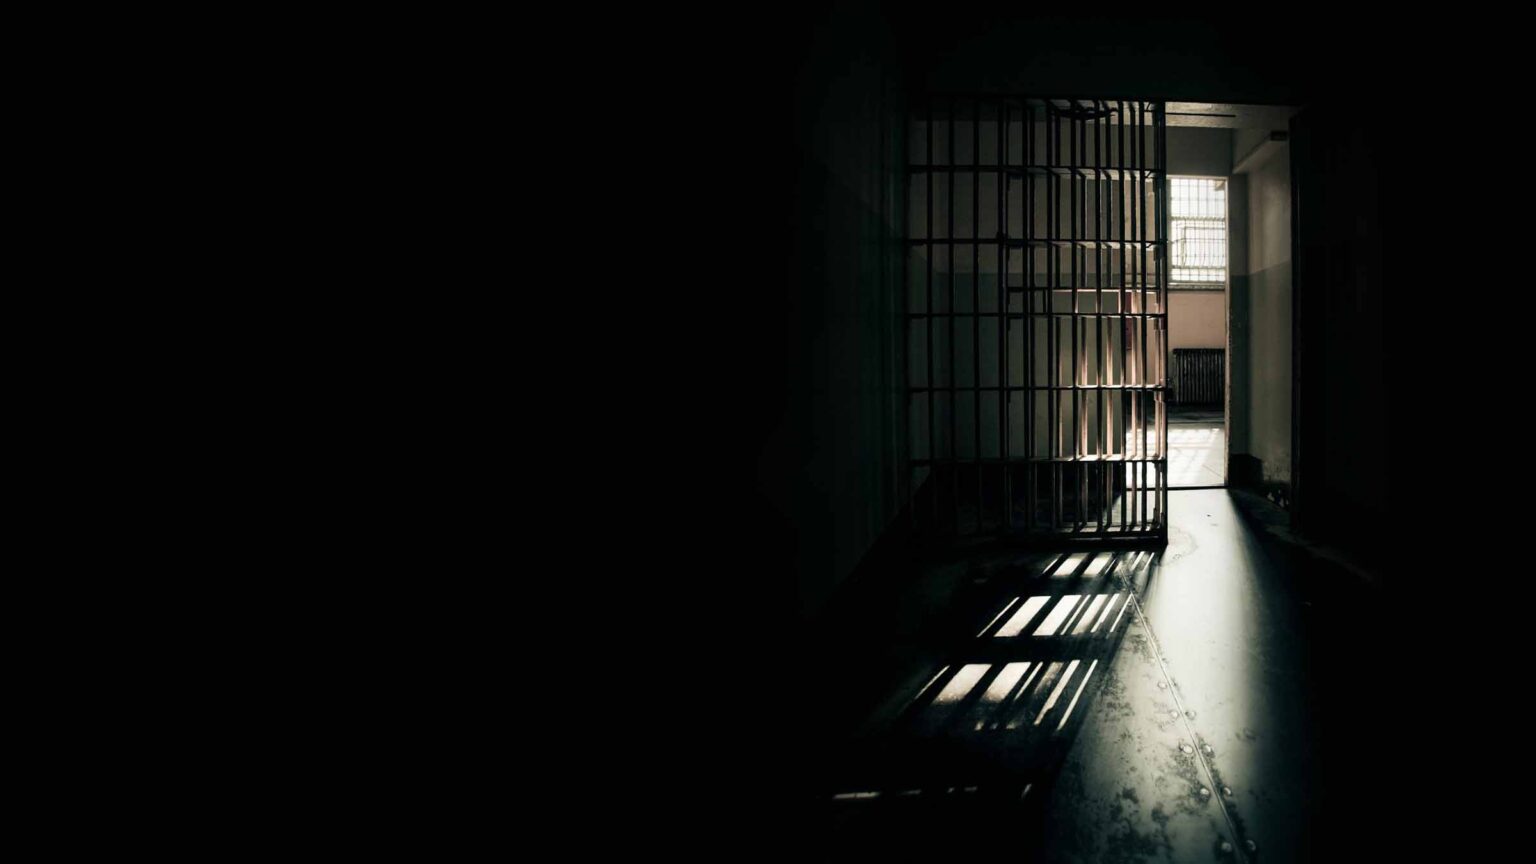 The criminal law is supposed to help bring justice to those who do wrong. But what if the wrong person ends up behind bars? It happens more than you think.